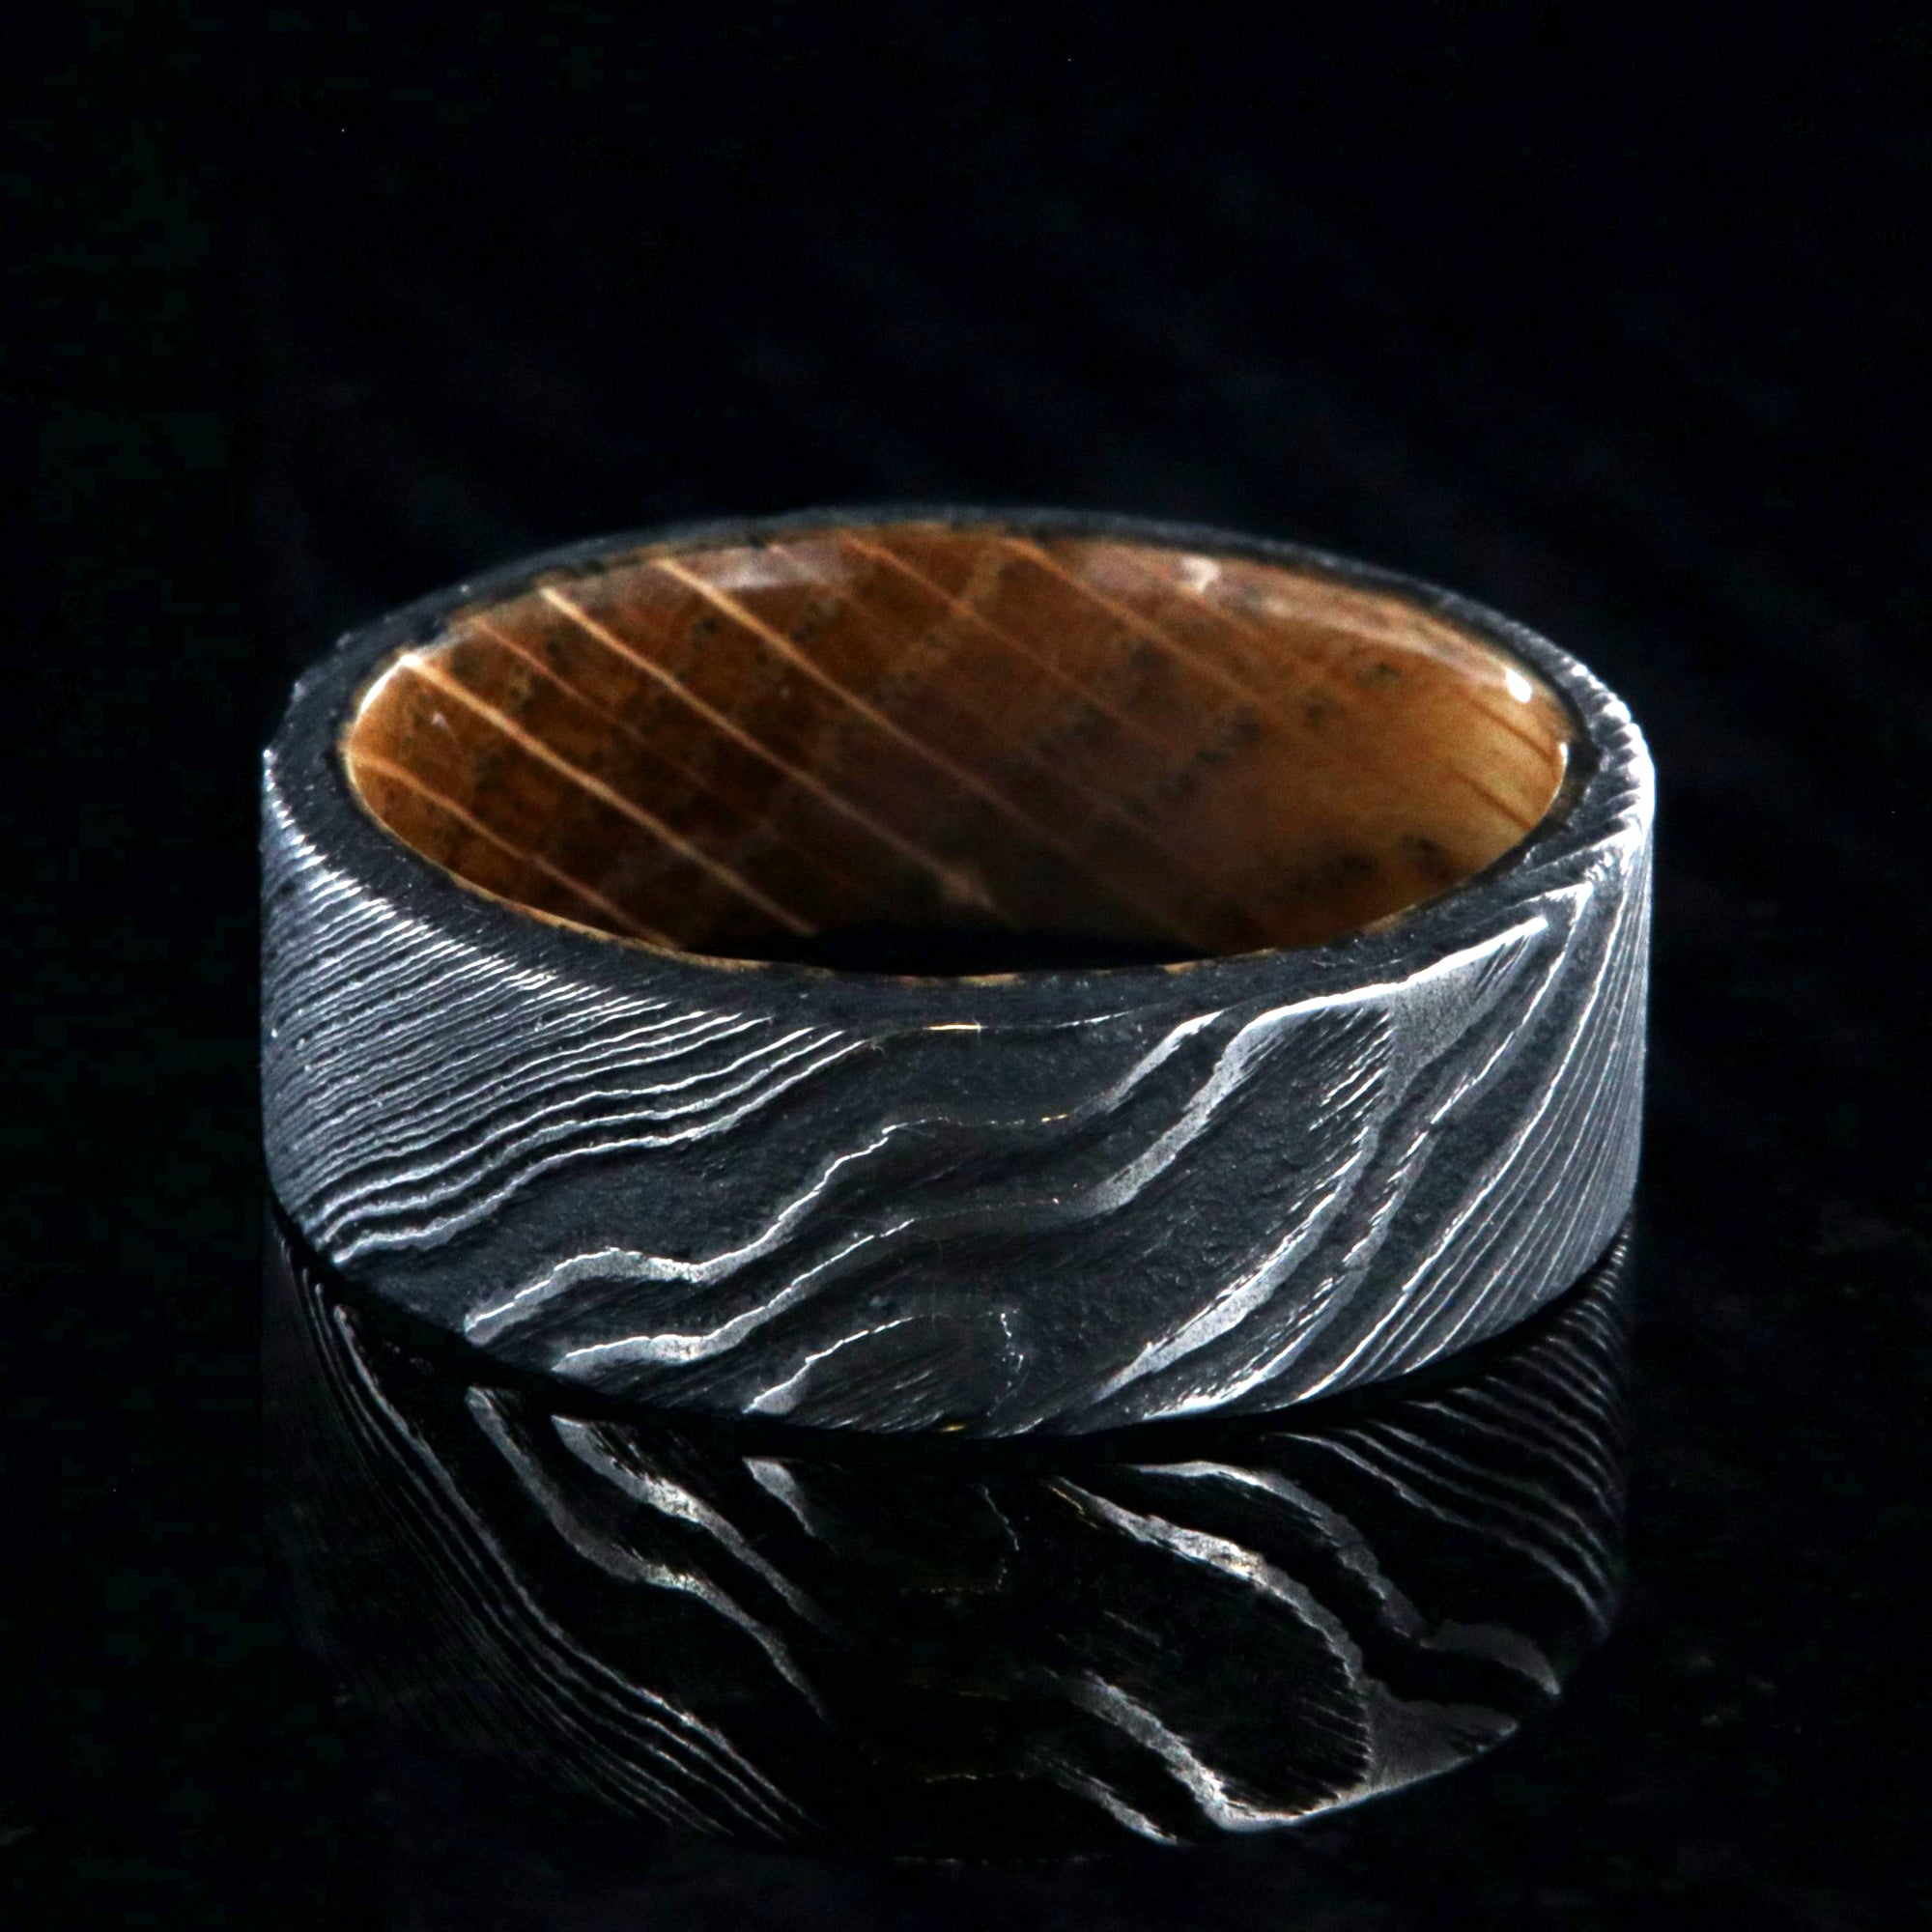 8mm wide black Damascus steel ring with flat profile and a Jack Daniel's whiskey barrel sleeve